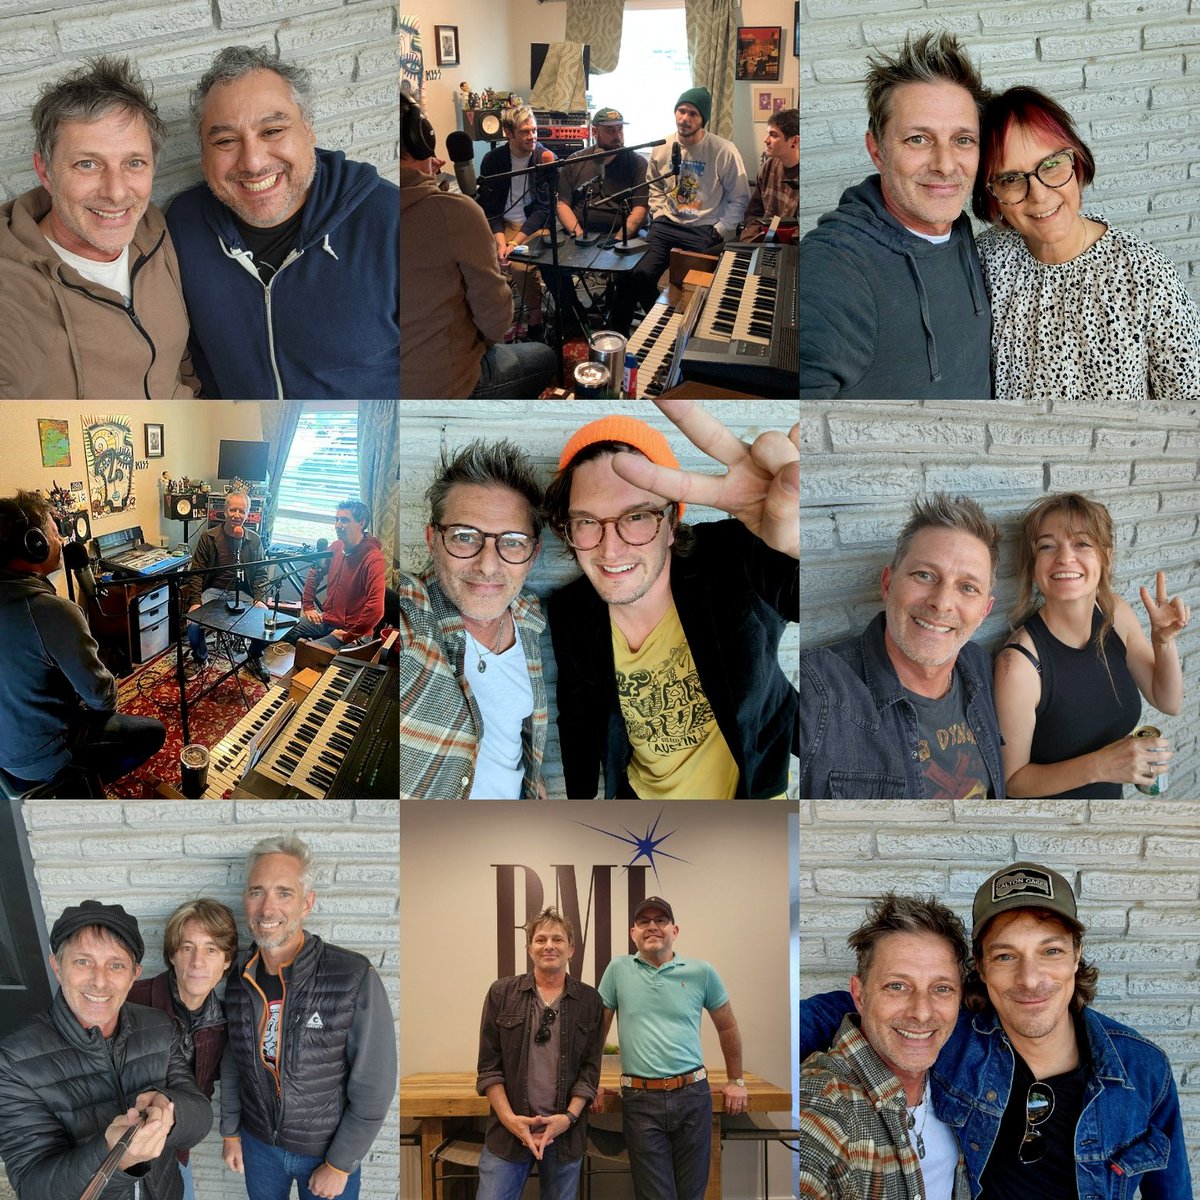 Thank you, thank you, thank you for listening to How Did I Get Here? in 2023! It's been a blast meeting and talking to some of my heroes and getting to know new artists this year. Here are just a few photos of some of the highlights. Keep on listening in 2024. Let's get down!